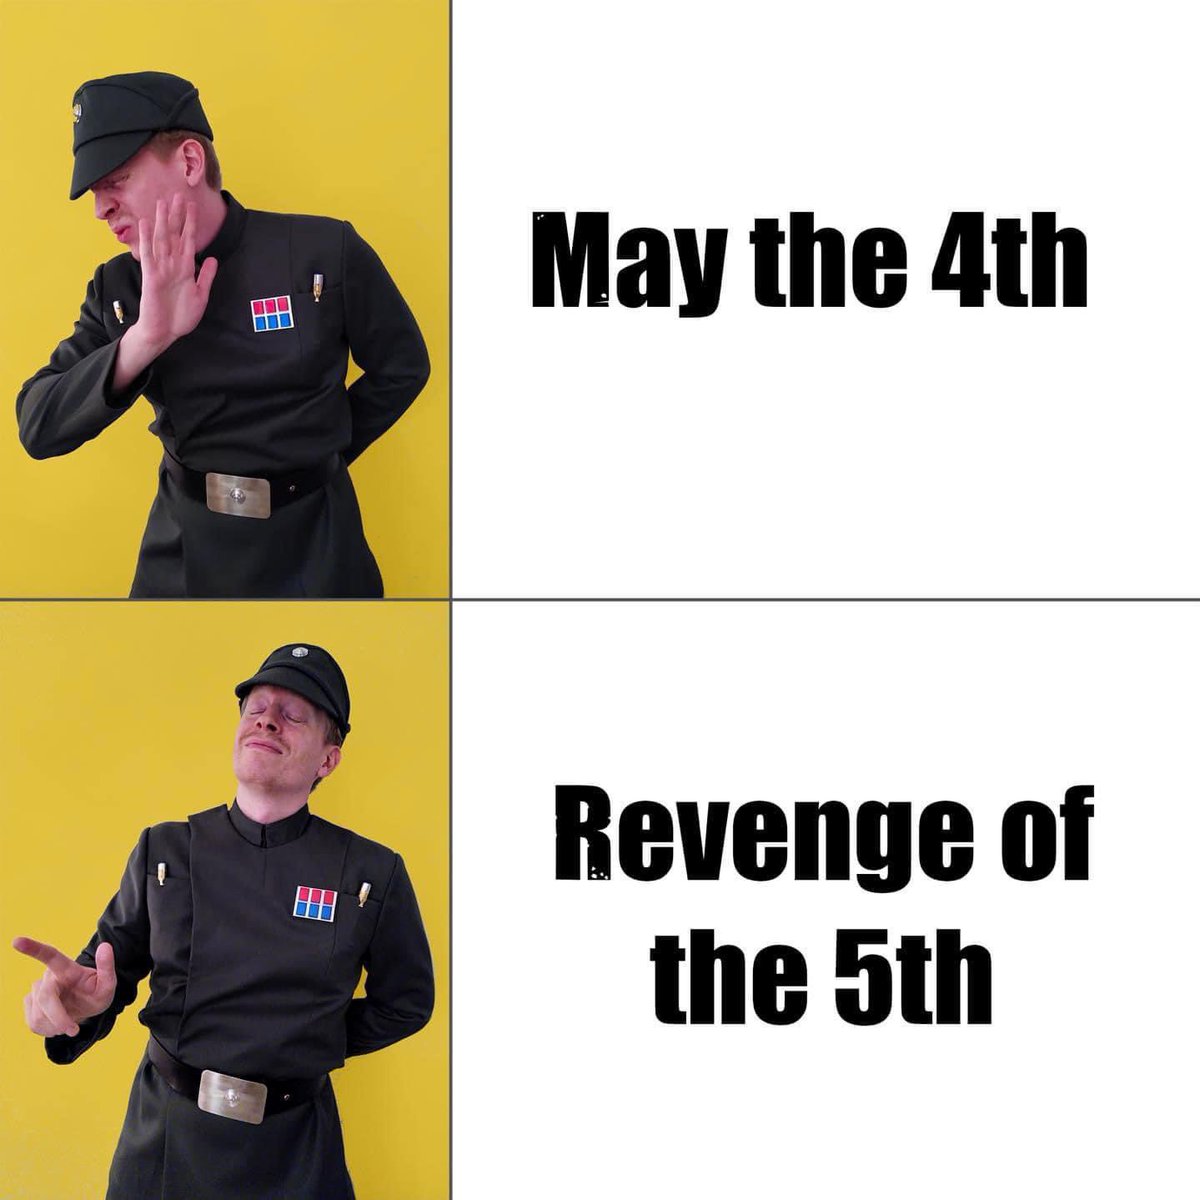 From everyone in the Imperial Officers Corps we hope everyone has a fantastic Revenge of the 5th! ID-33110 of @swedishgarrison #501st #501stLegion #StarWars #ImperialOfficer #ImperialOfficerCorps #IOC #DutyHonorEmpire #BadGuysDoingGood